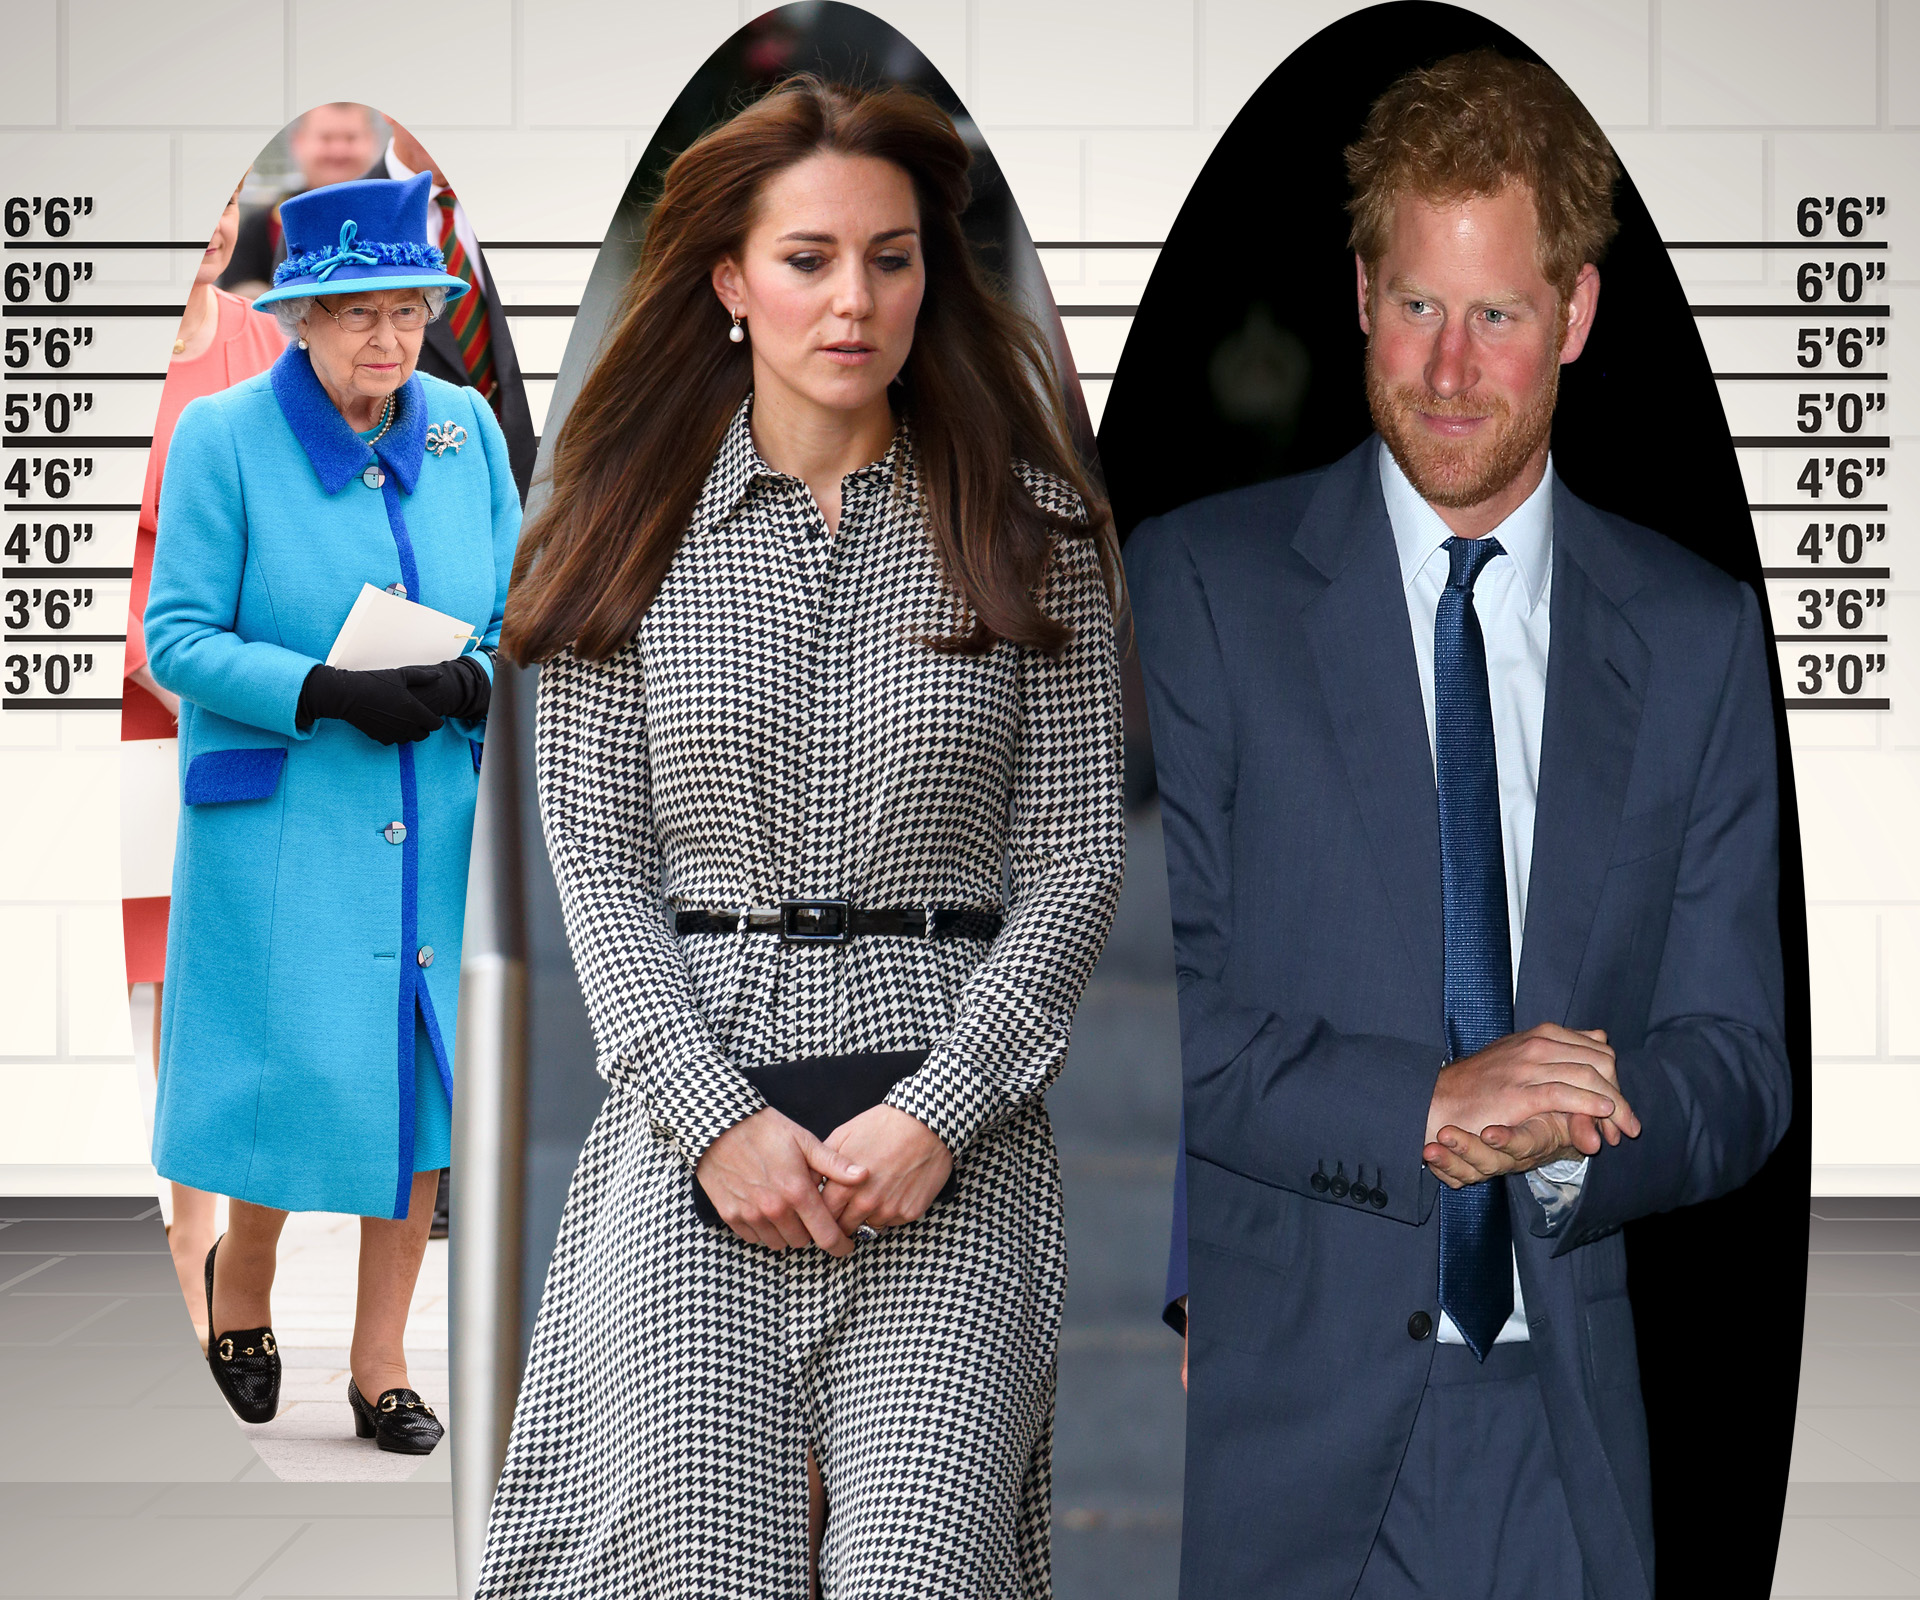 Who is your royal height twin?